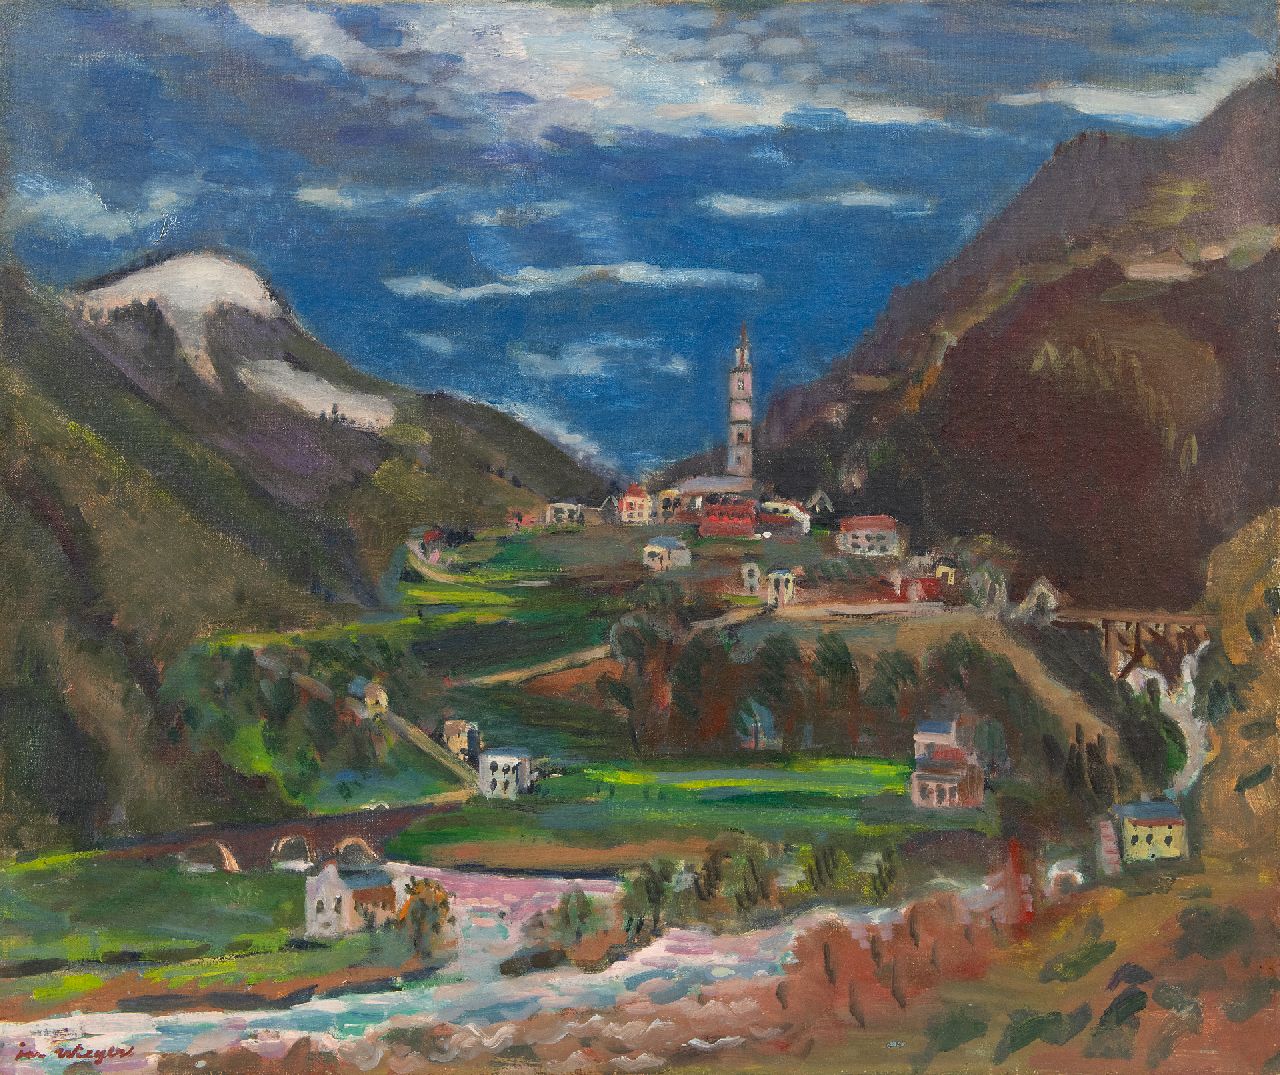 Wiegers J.  | Jan Wiegers, A view of  Intragna, Ticino, Switzerland, oil on canvas 61.5 x 73.4 cm, signed l.l. and painted ca. 1947